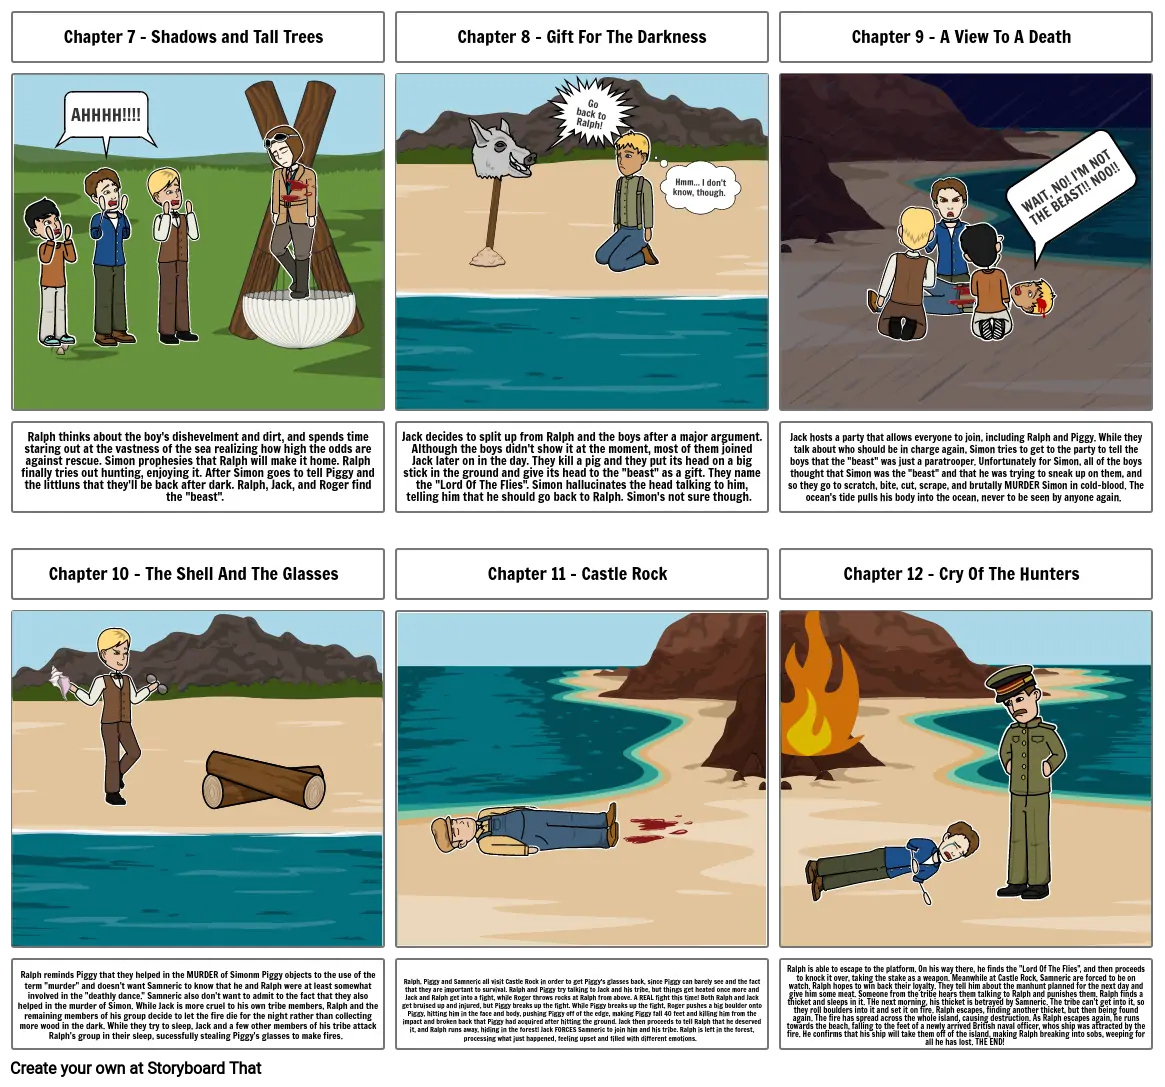 Lord Of The Flies Comic Strip Summary Chapter 7 - 12